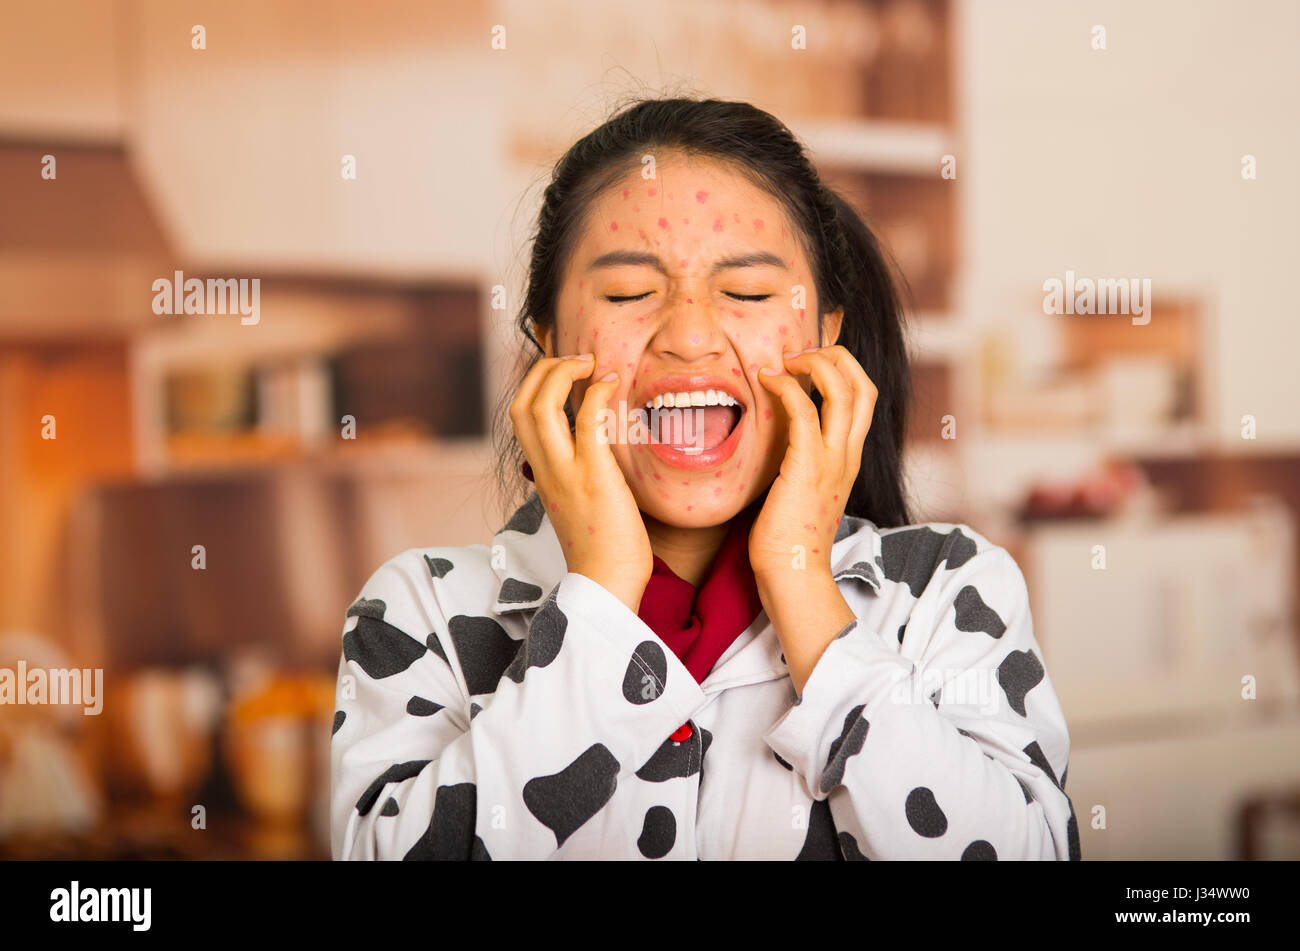 Portrait of young girl with skin problem scratch her face with both hands Stock Photo